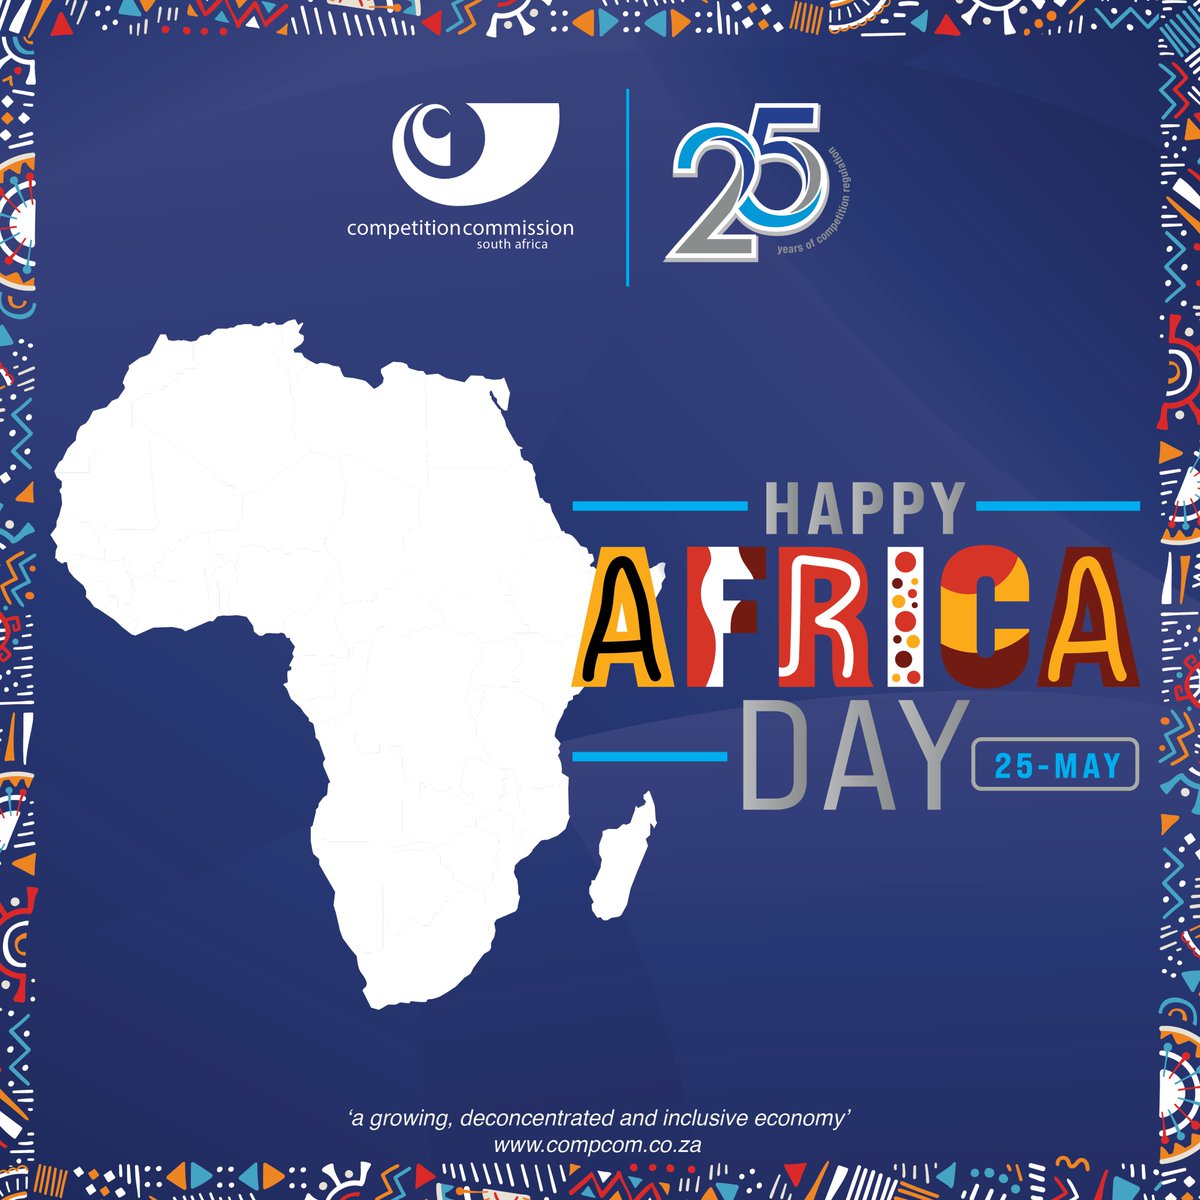 Happy Africa Day!!! #AfricaDay